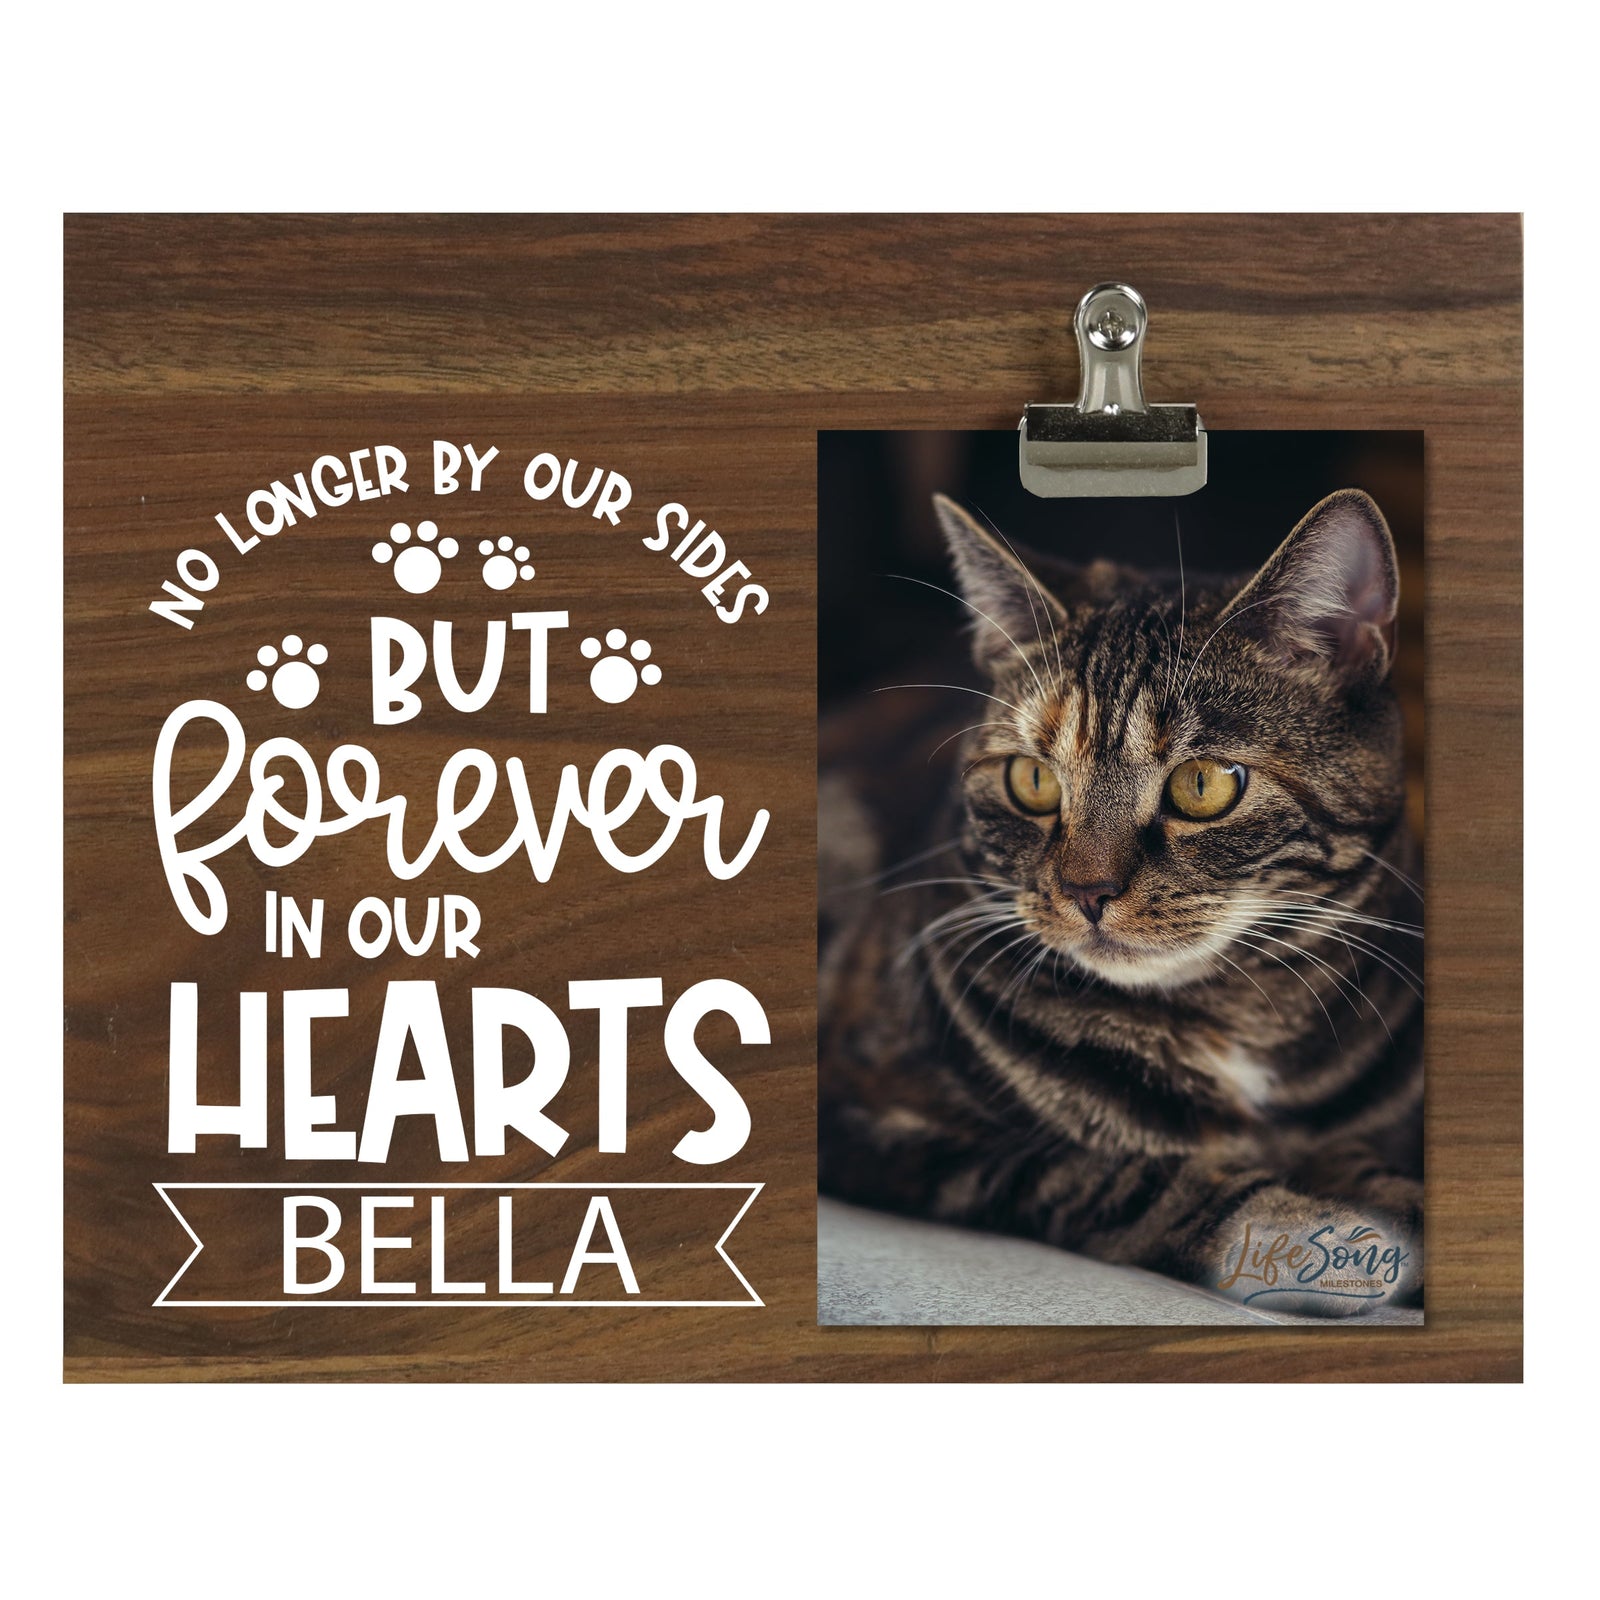 Pet Memorial Photo Clip Board - No Longer By Our Sides